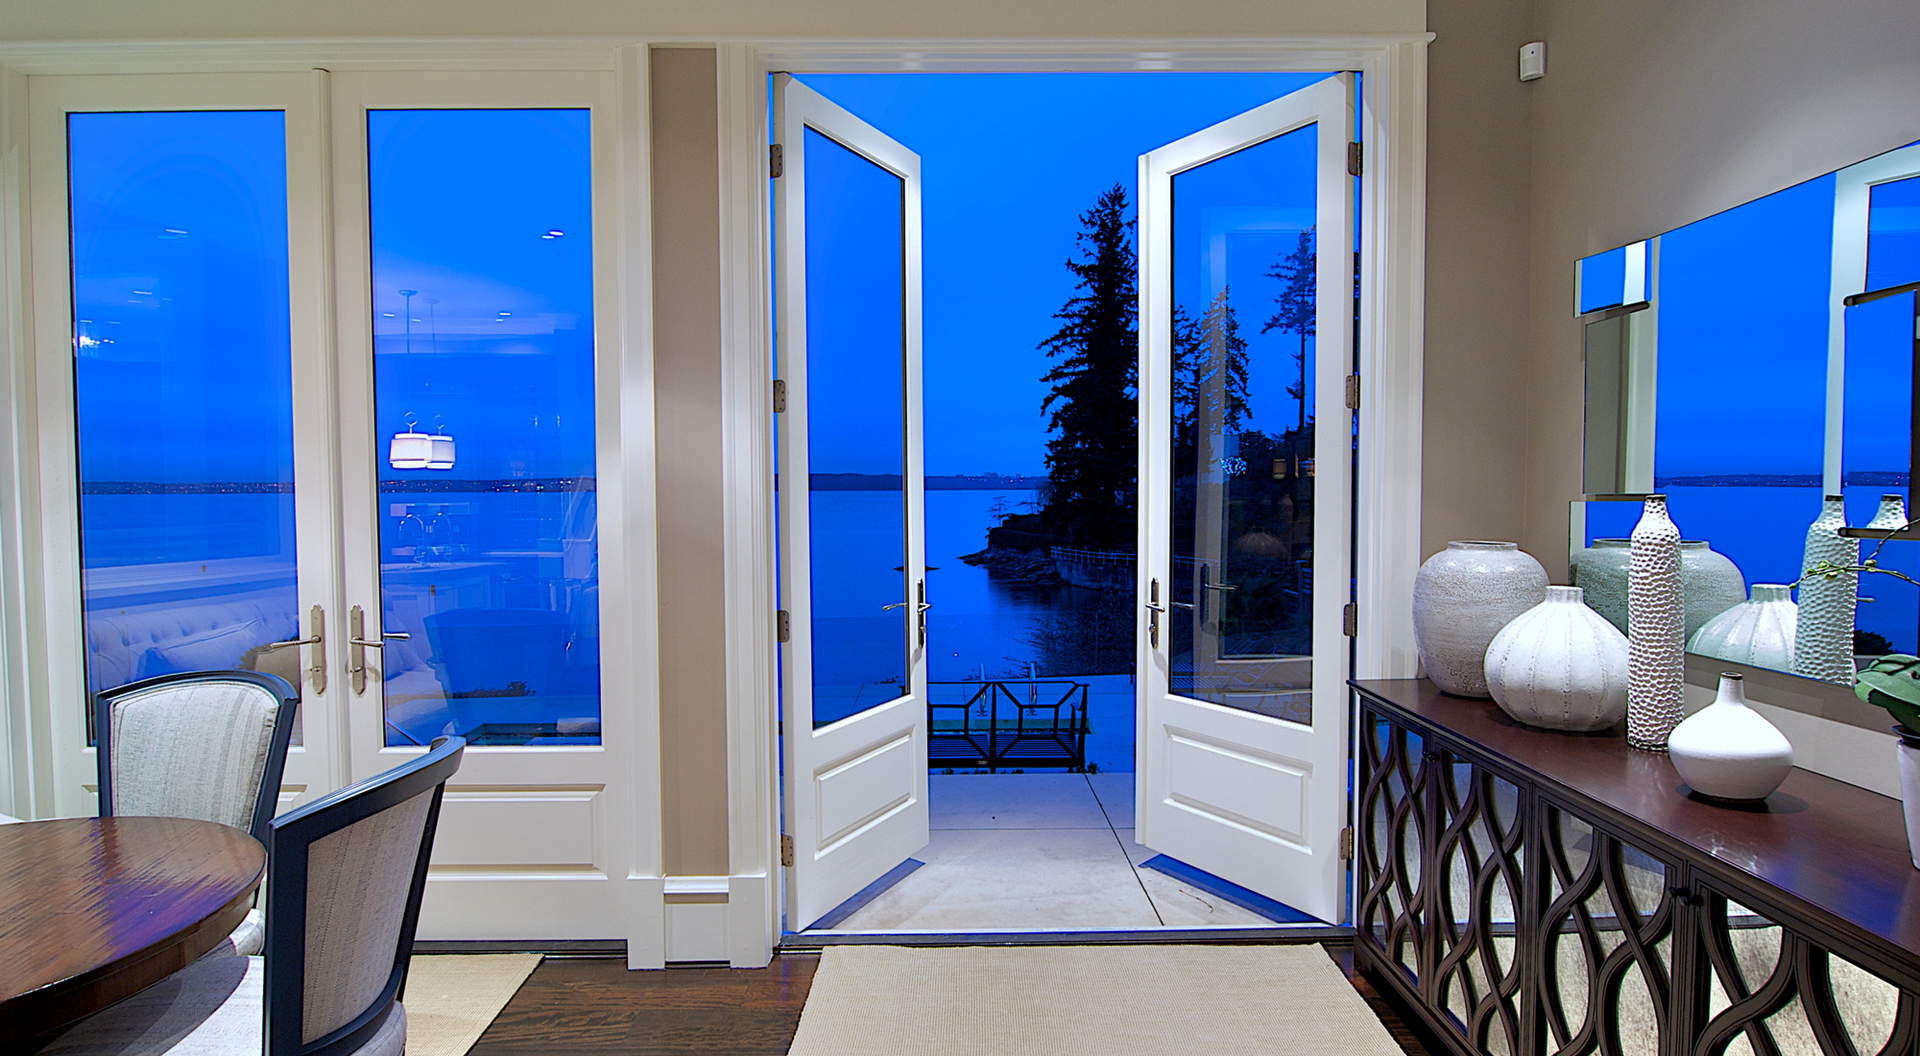 French Doors Out to Backyard